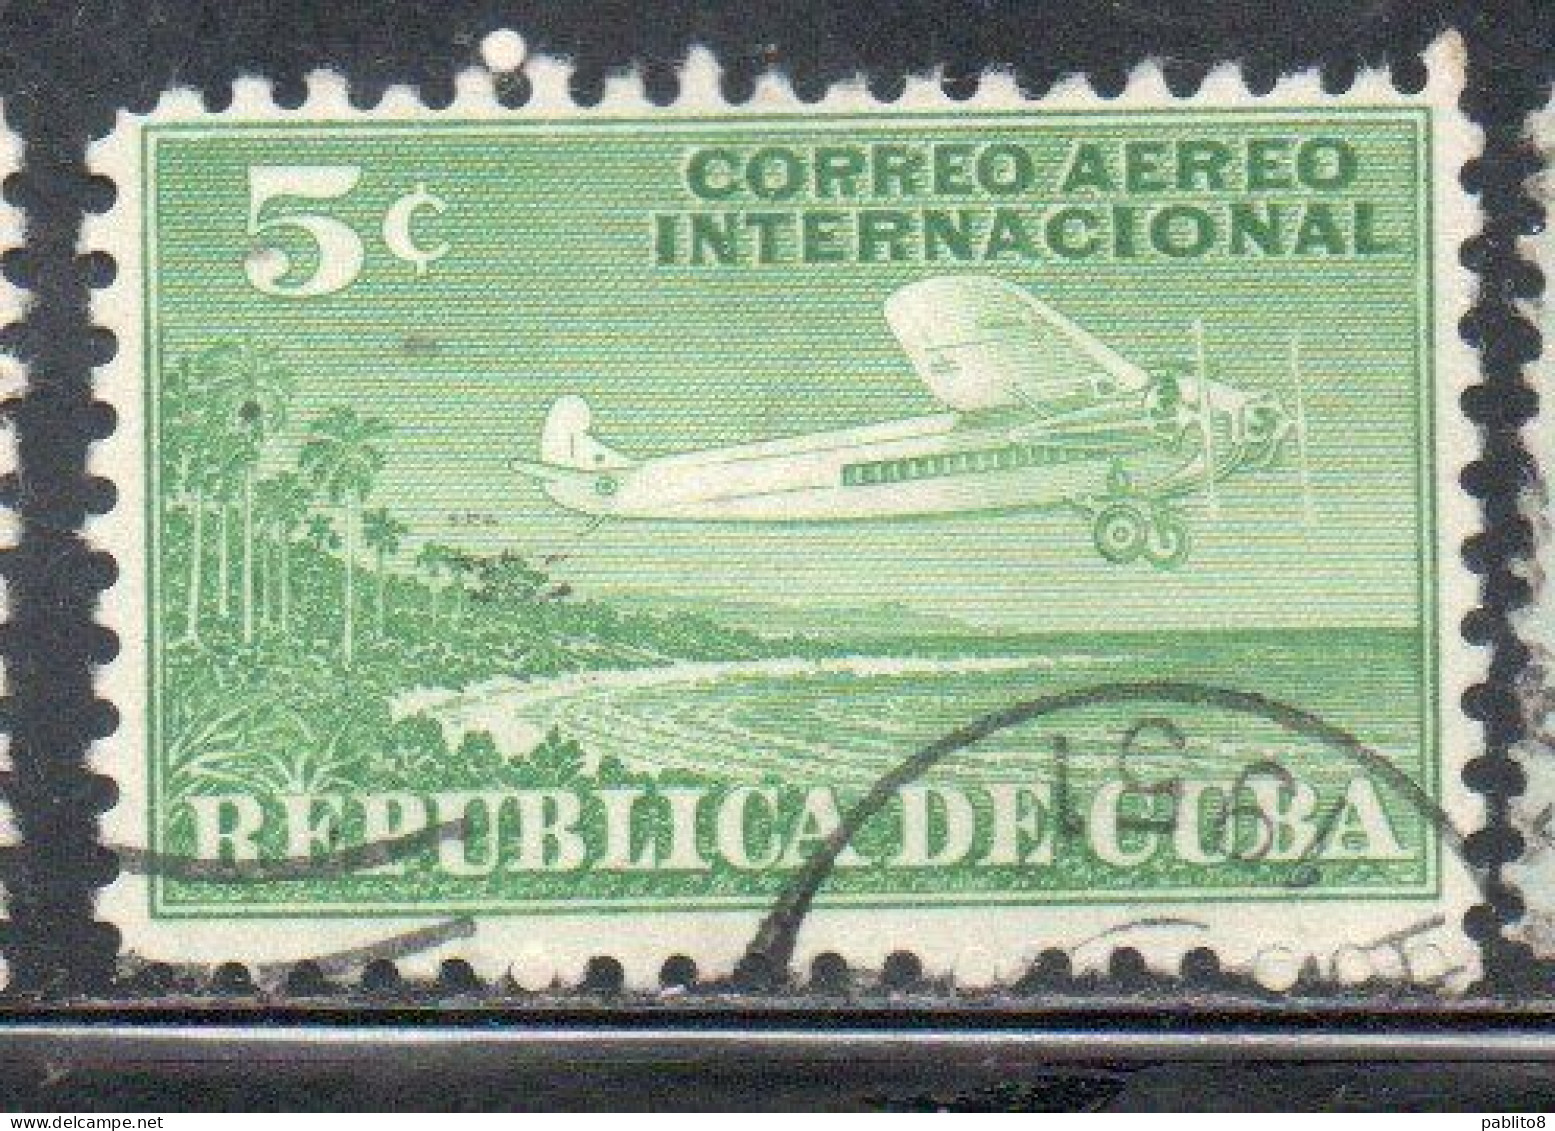 CUBA 1931 AIRMAIL AIR POST MAIL FOR FOREIGN POSTAGE PLANE AND COAST 5c USADO USED USATO OBLITERE' - Airmail